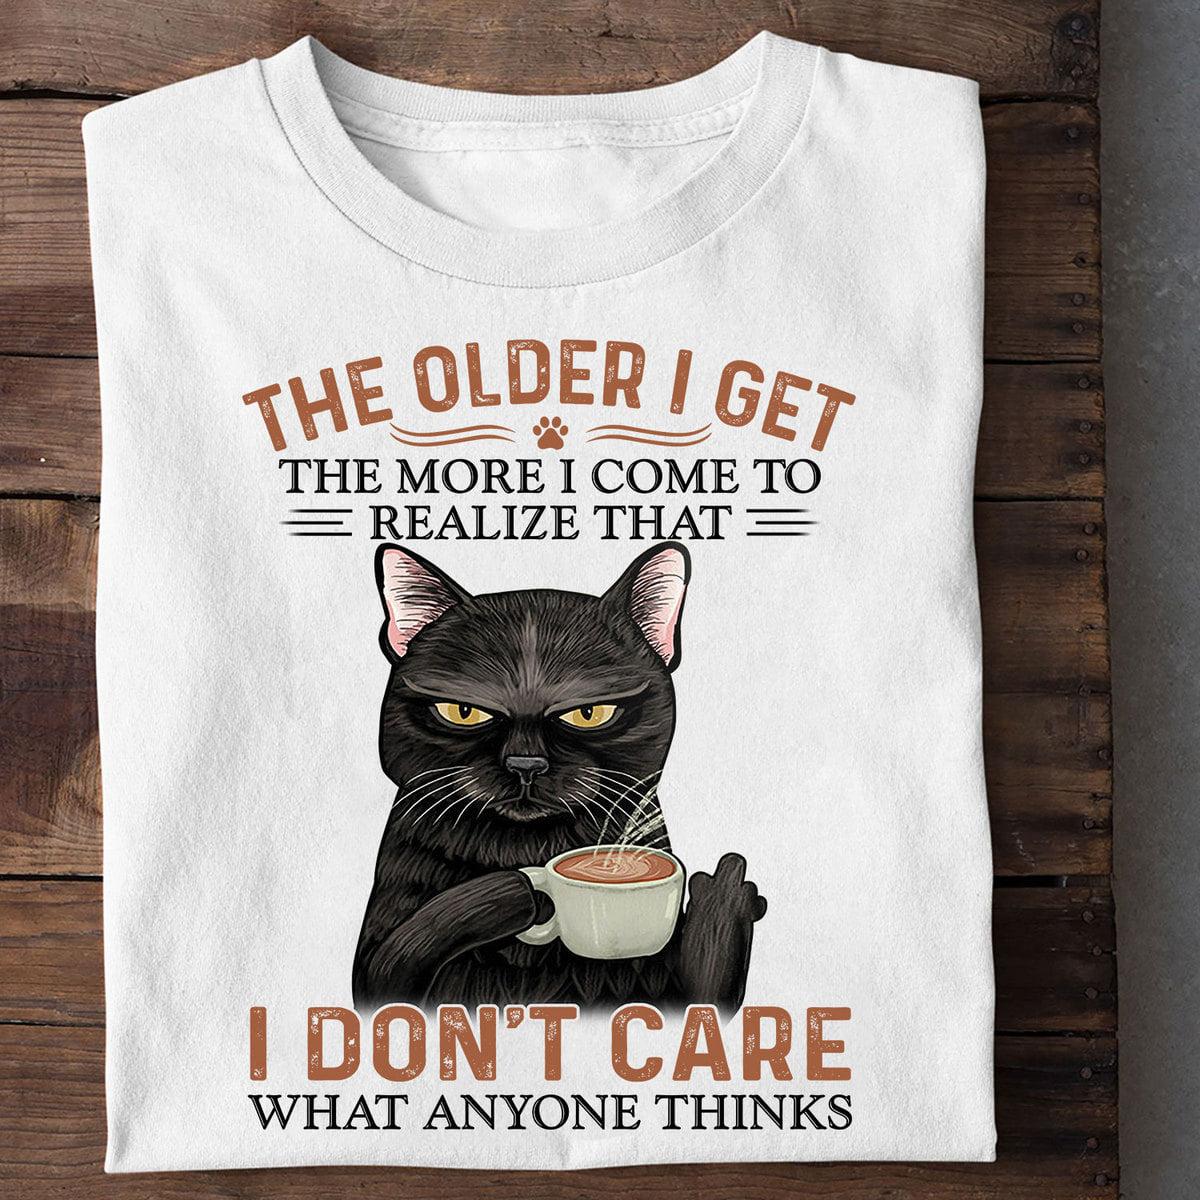 Black Cat Coffee - The older i get the more i come to realize that i don't care what anyone thinks